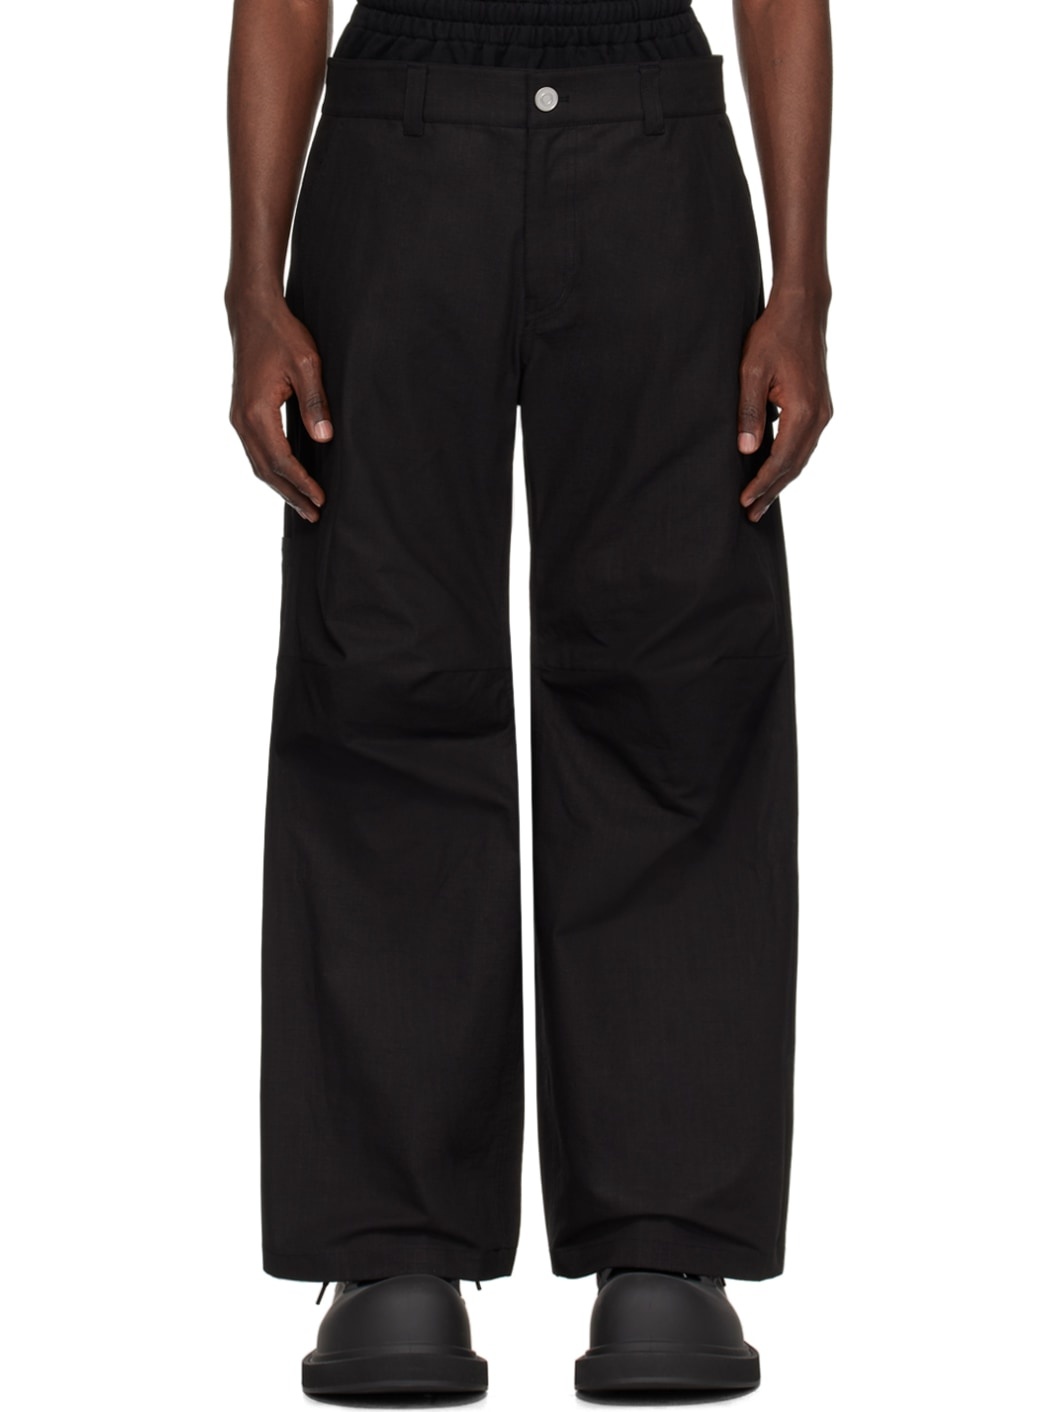 Black Layered Trousers - 1